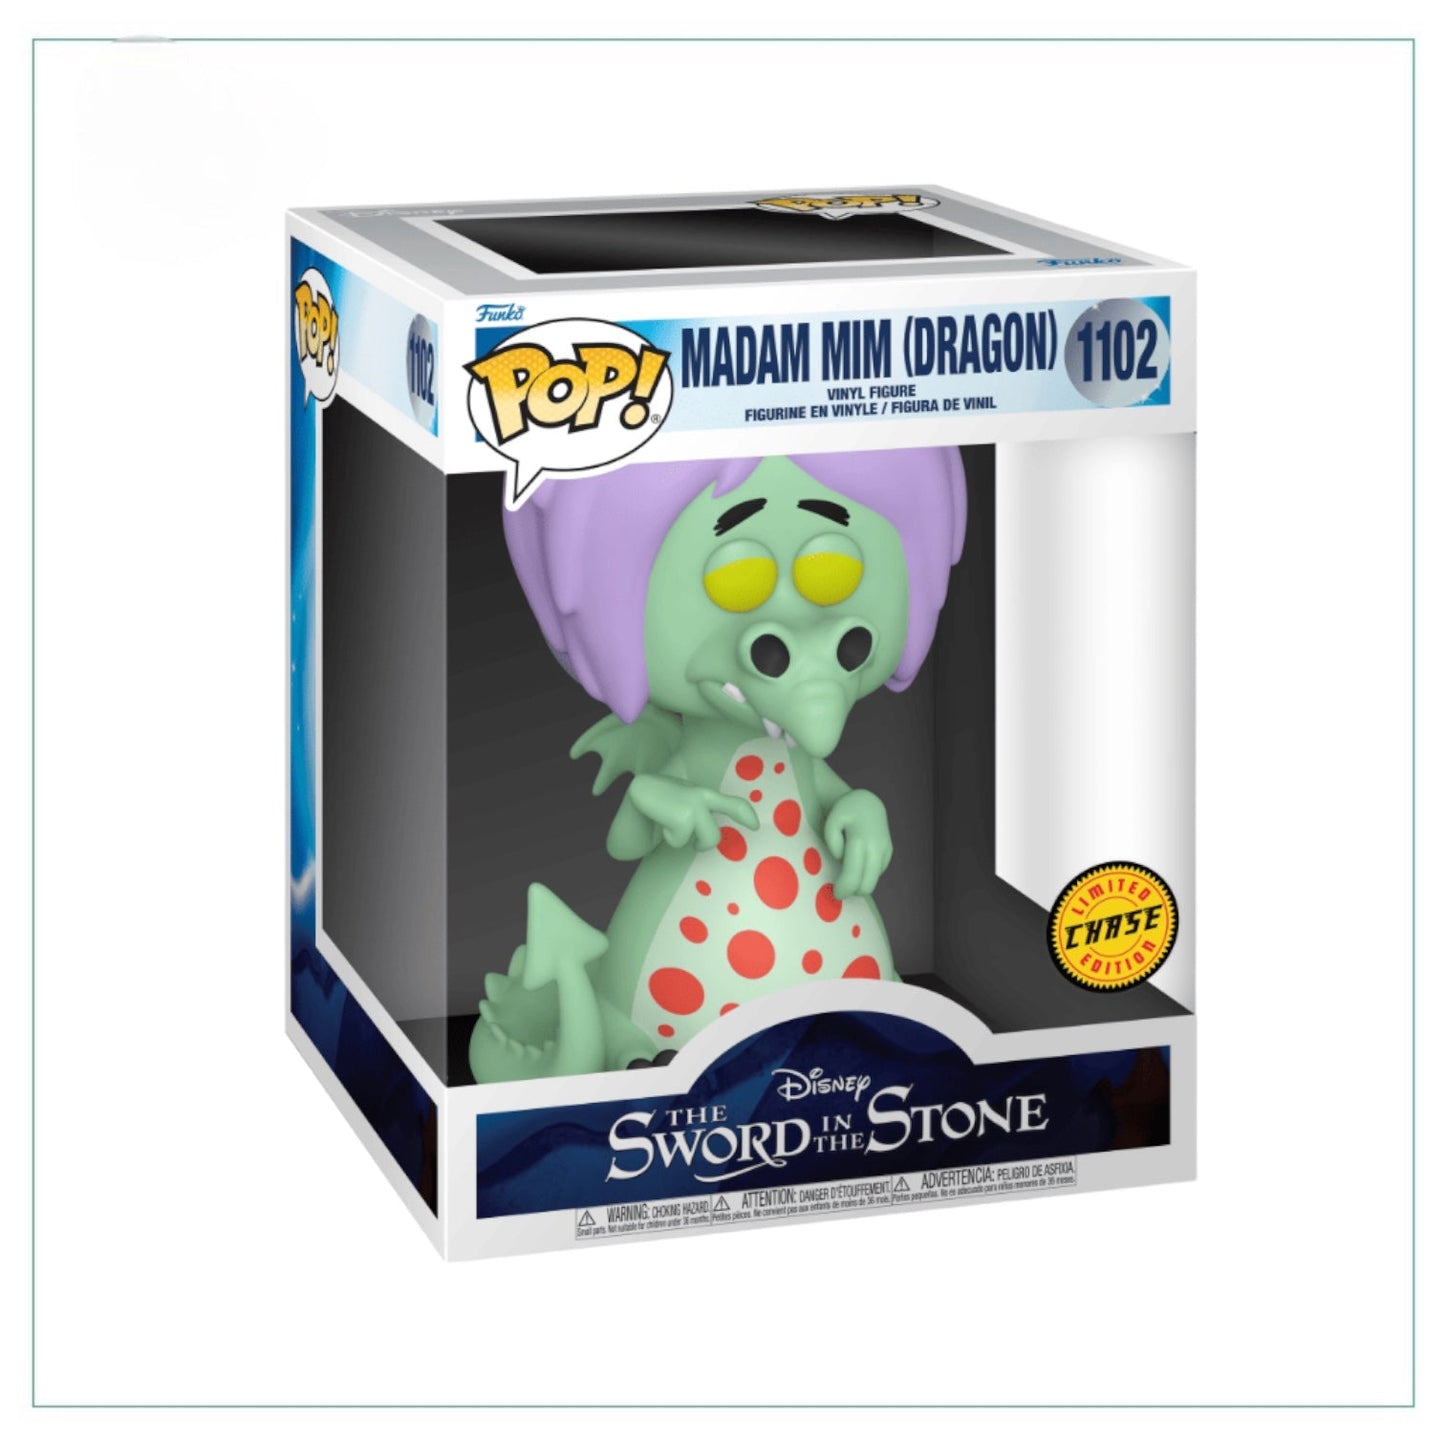 Madam Mim (Dragon) #1102 Funko Deluxe Pop! - The Sword in the Stone - Disney - Chase Edition - Angry Cat